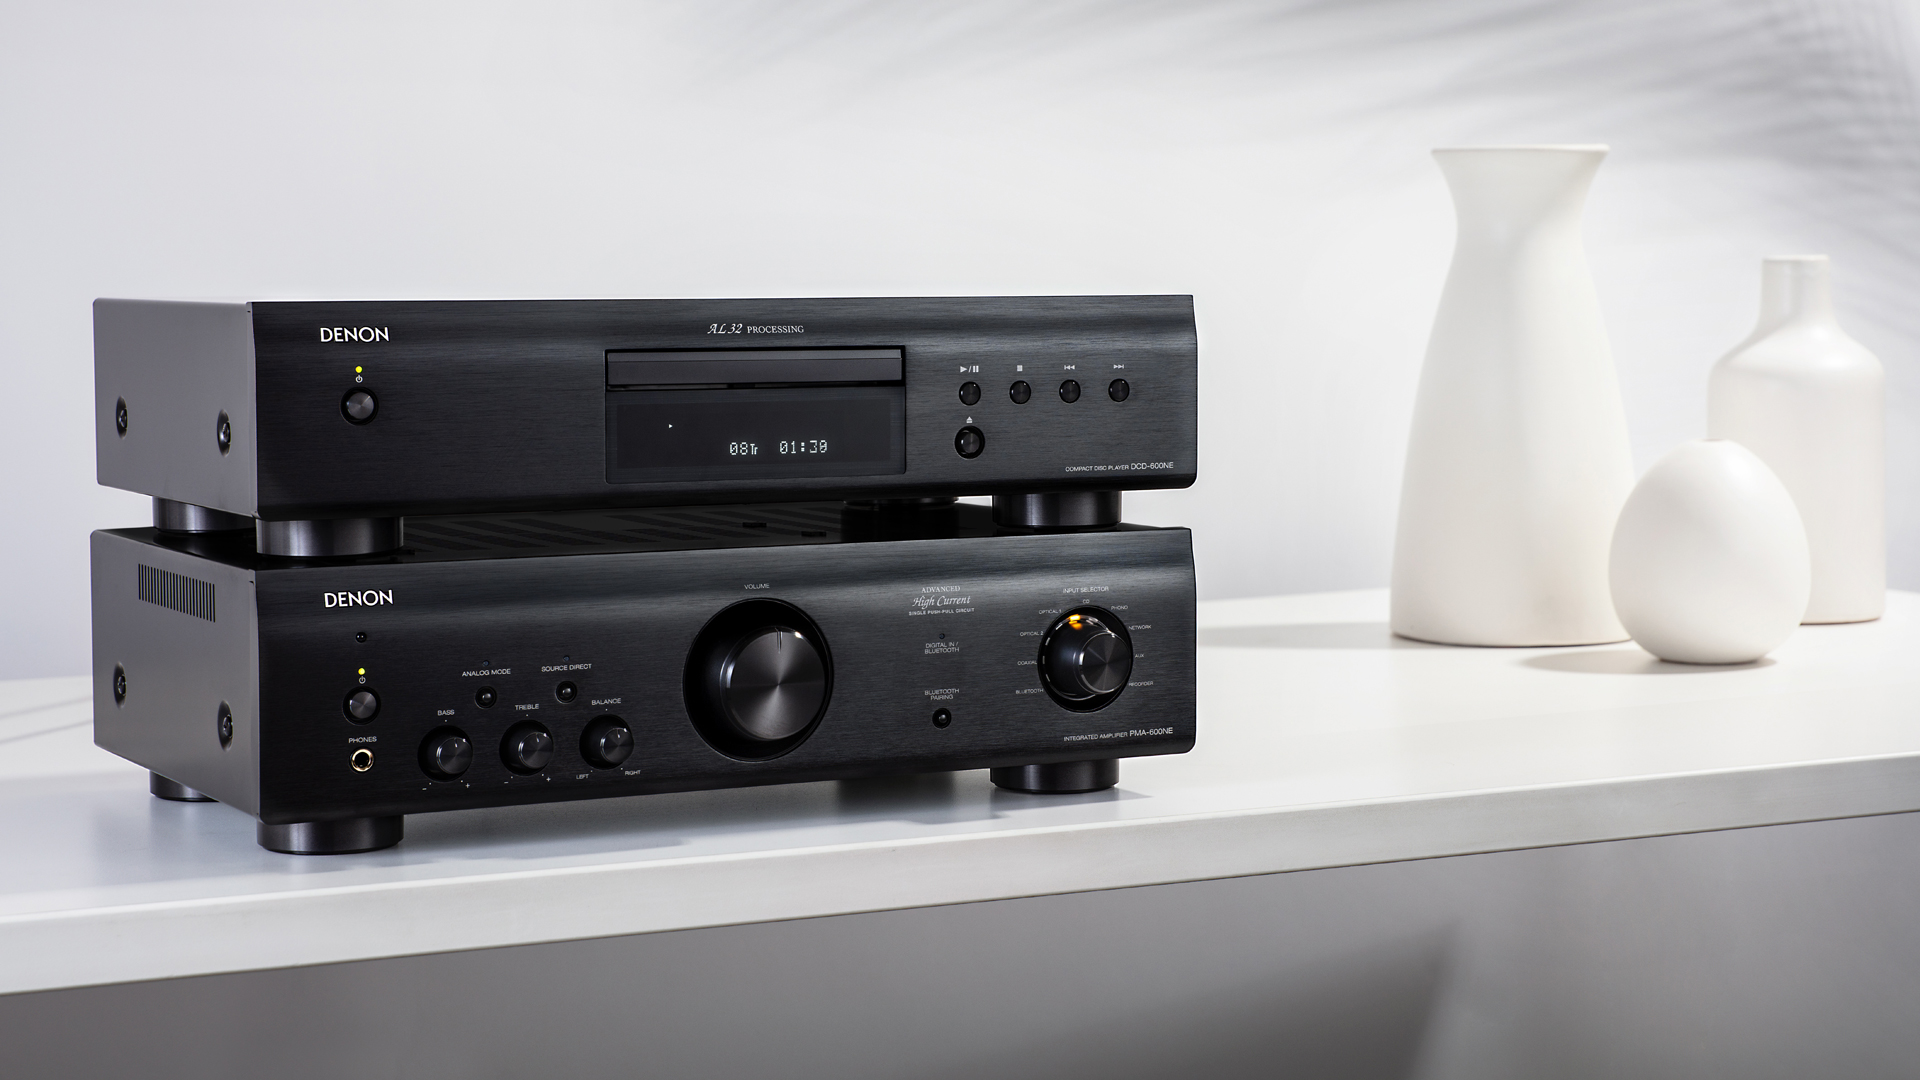 Denon launches 600 Series amplifier and CD player | What Hi-Fi?